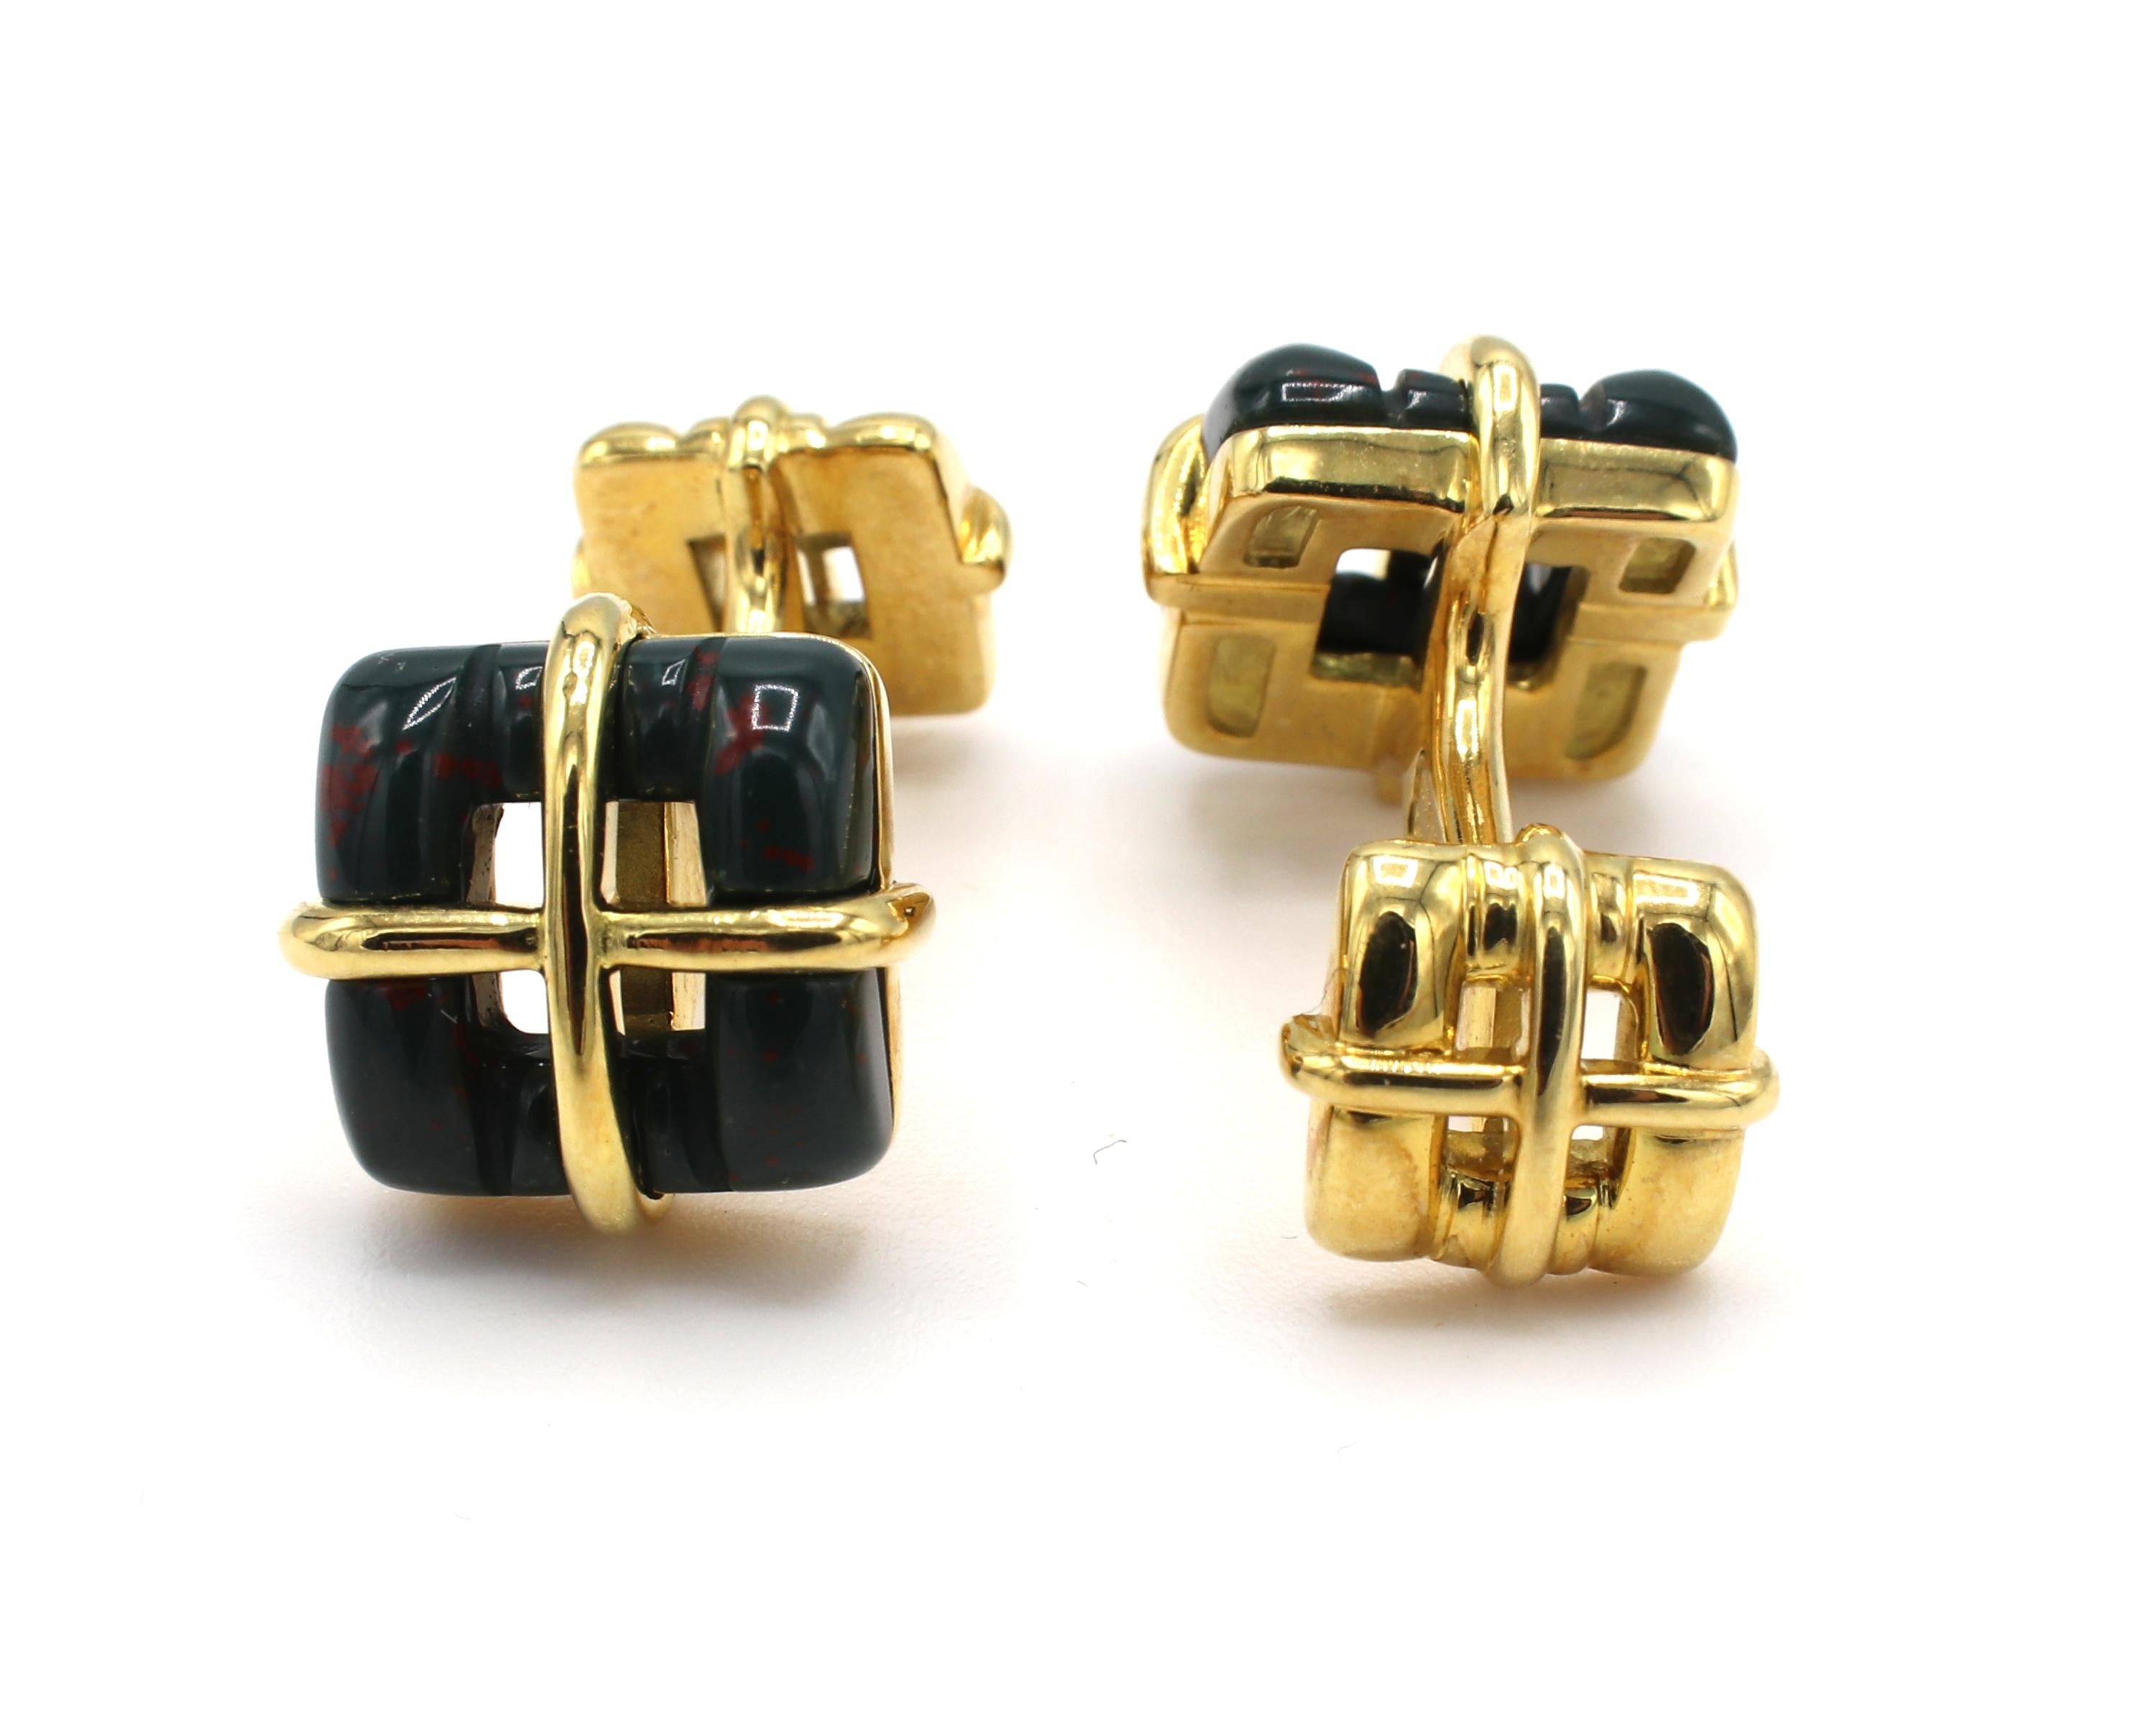 Tiffany & Co. Bloodstone & Gold Square Box Cufflinks 
Metal: 18k yellow gold
Weight: 15.96 grams
Stone: Bloodstone
Signed: 2002 T&Co. 750 Italy 
Length: 25mm
Width: 9.3 - 13.5mm
